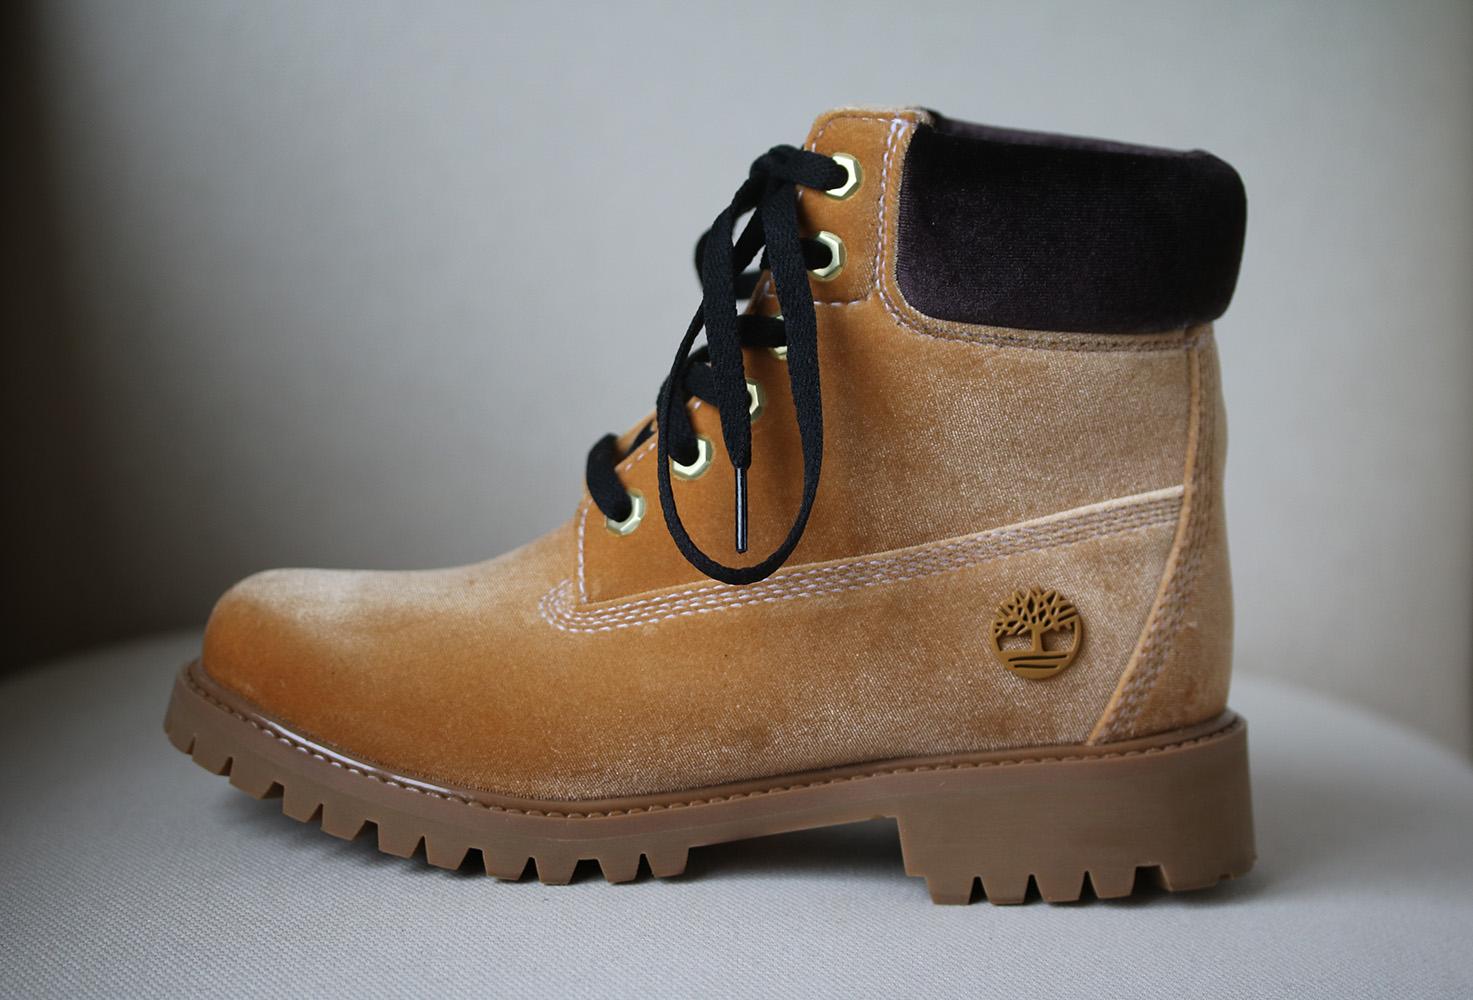 Off-White has collaborated with Timberland to create a limited edition capsule of its iconic 'Yellow Boots™'. Made from plush camel velvet, this version rests on a chunky lug sole that's injection-molded to the shoe to ensure your feet stay